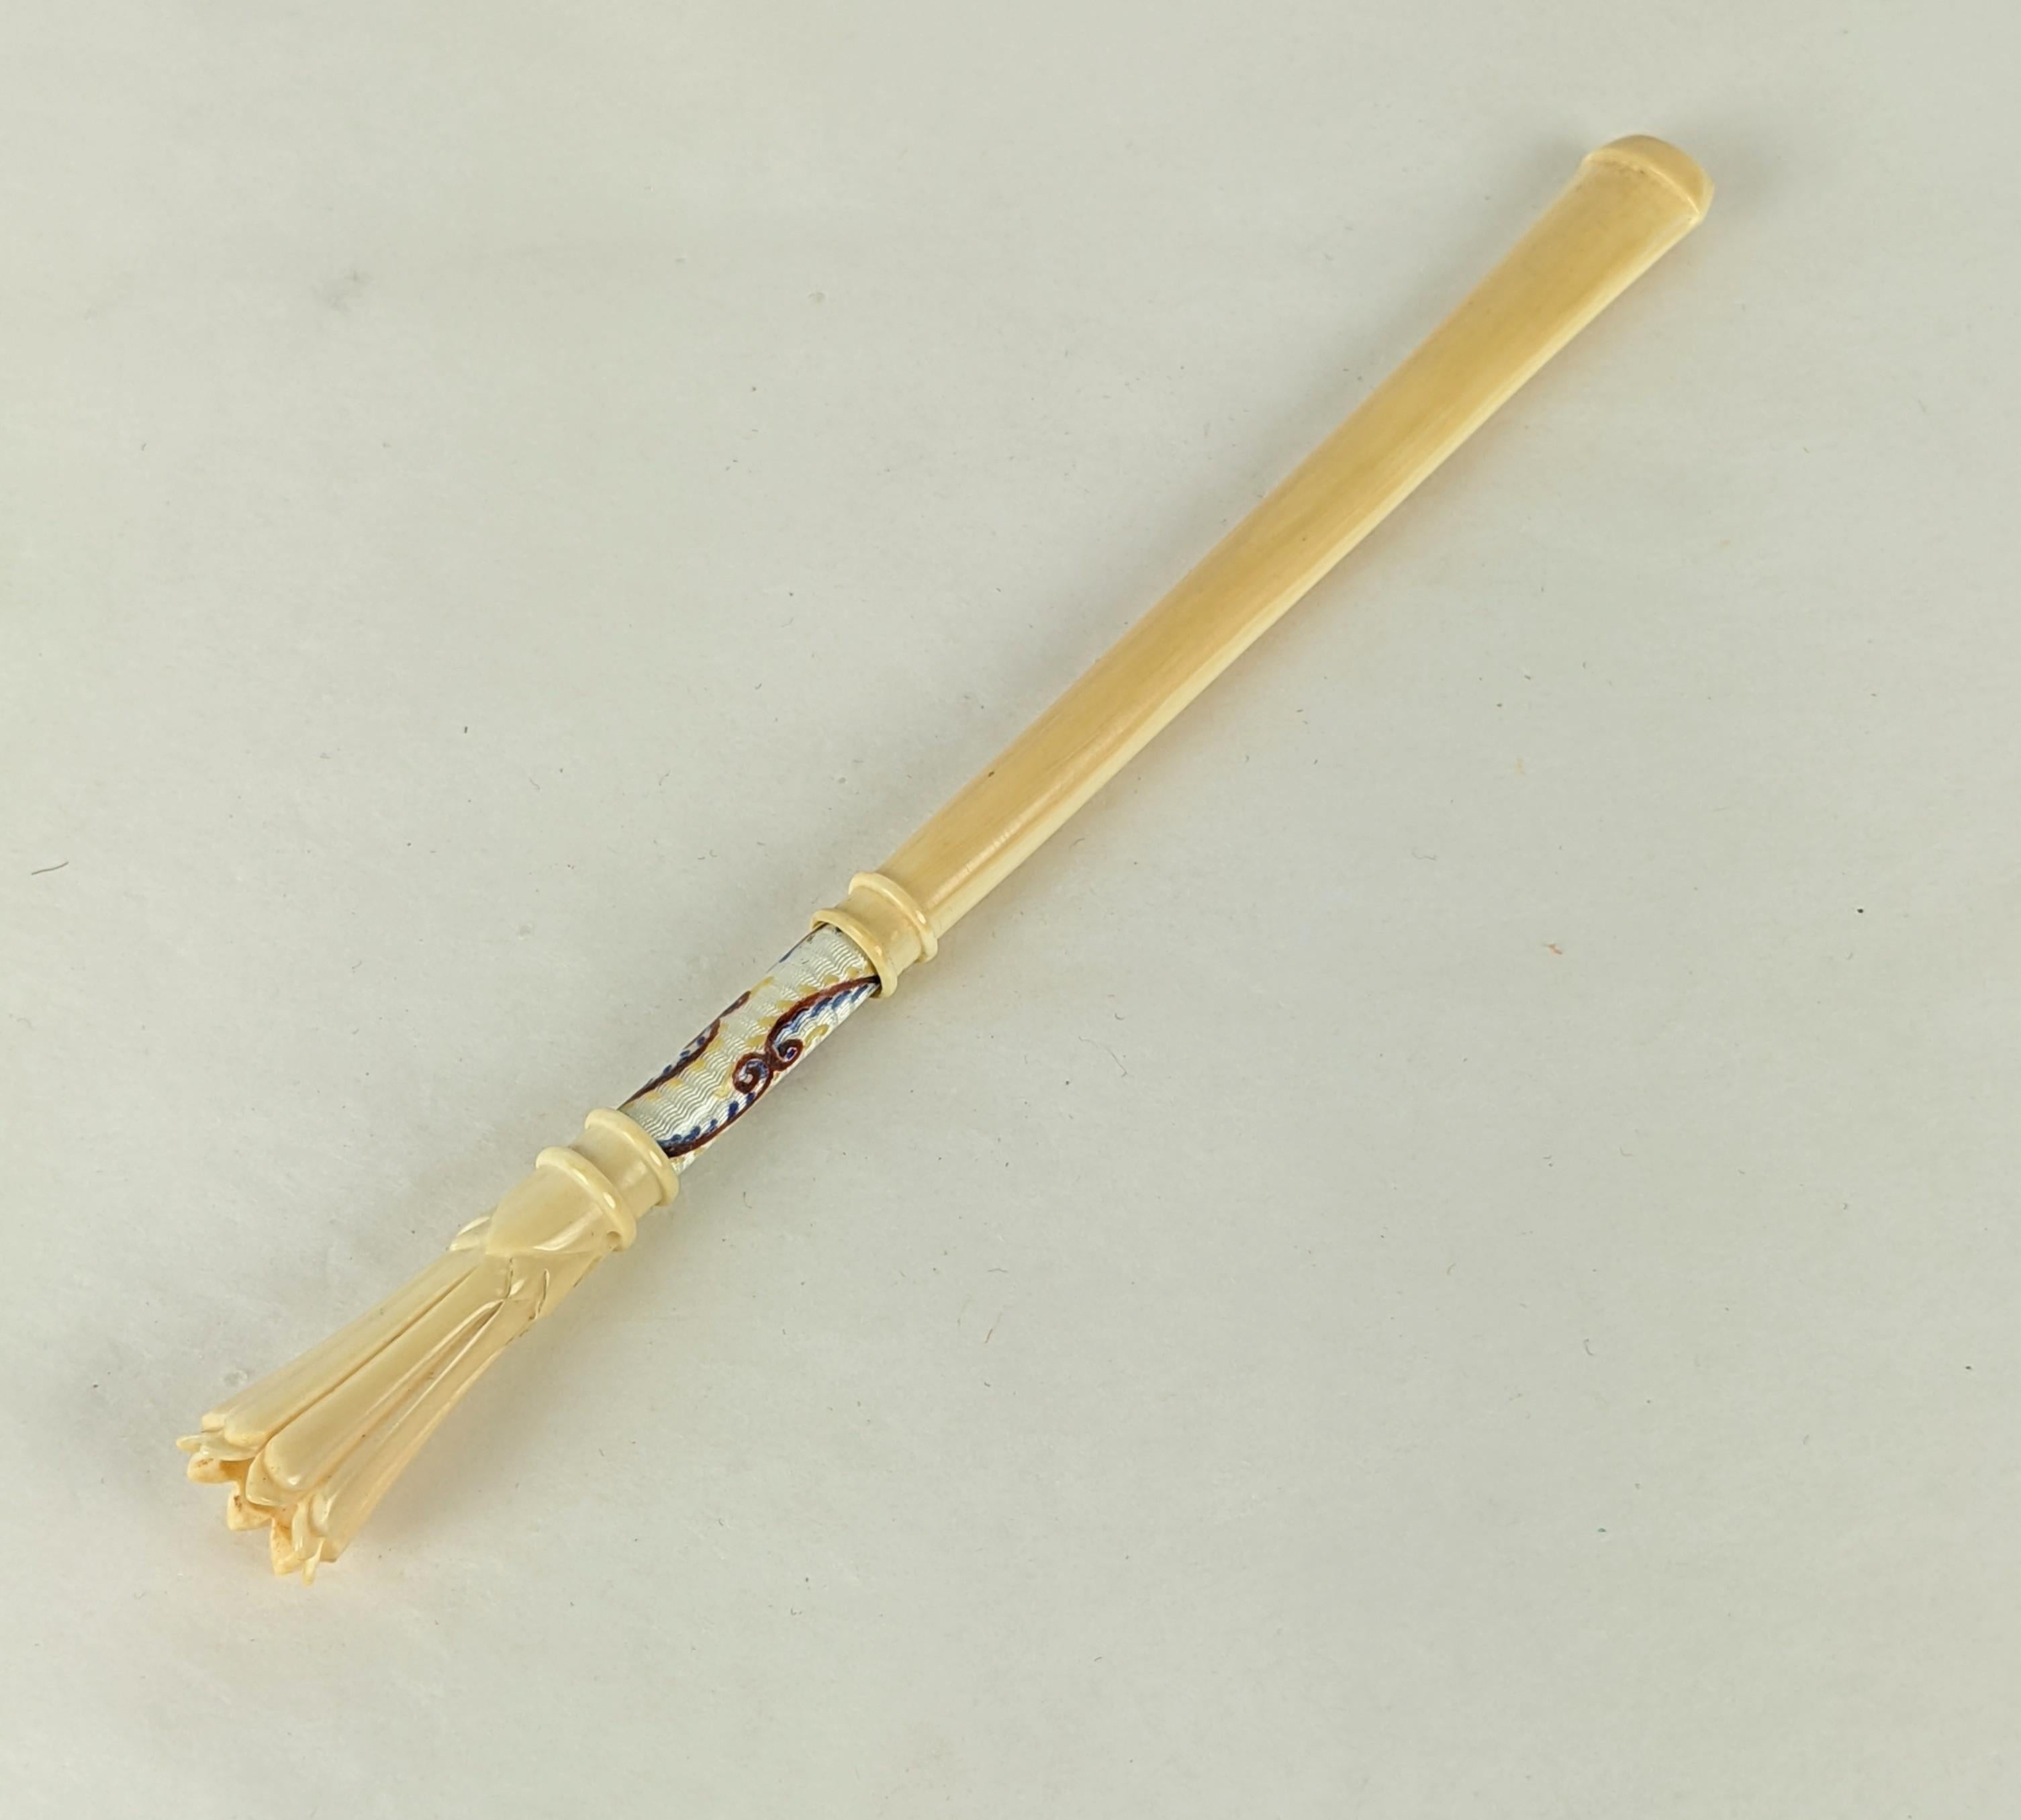 Art Deco Guilloche Enamel and Carved Bone Cigarette Holder with Case. Bone carved cigarette holder with enamel station on sterling in its own wine silk moire case lined in ivory calf leather. Sterling silver tip pin clasp. Appears unused. 
1920's